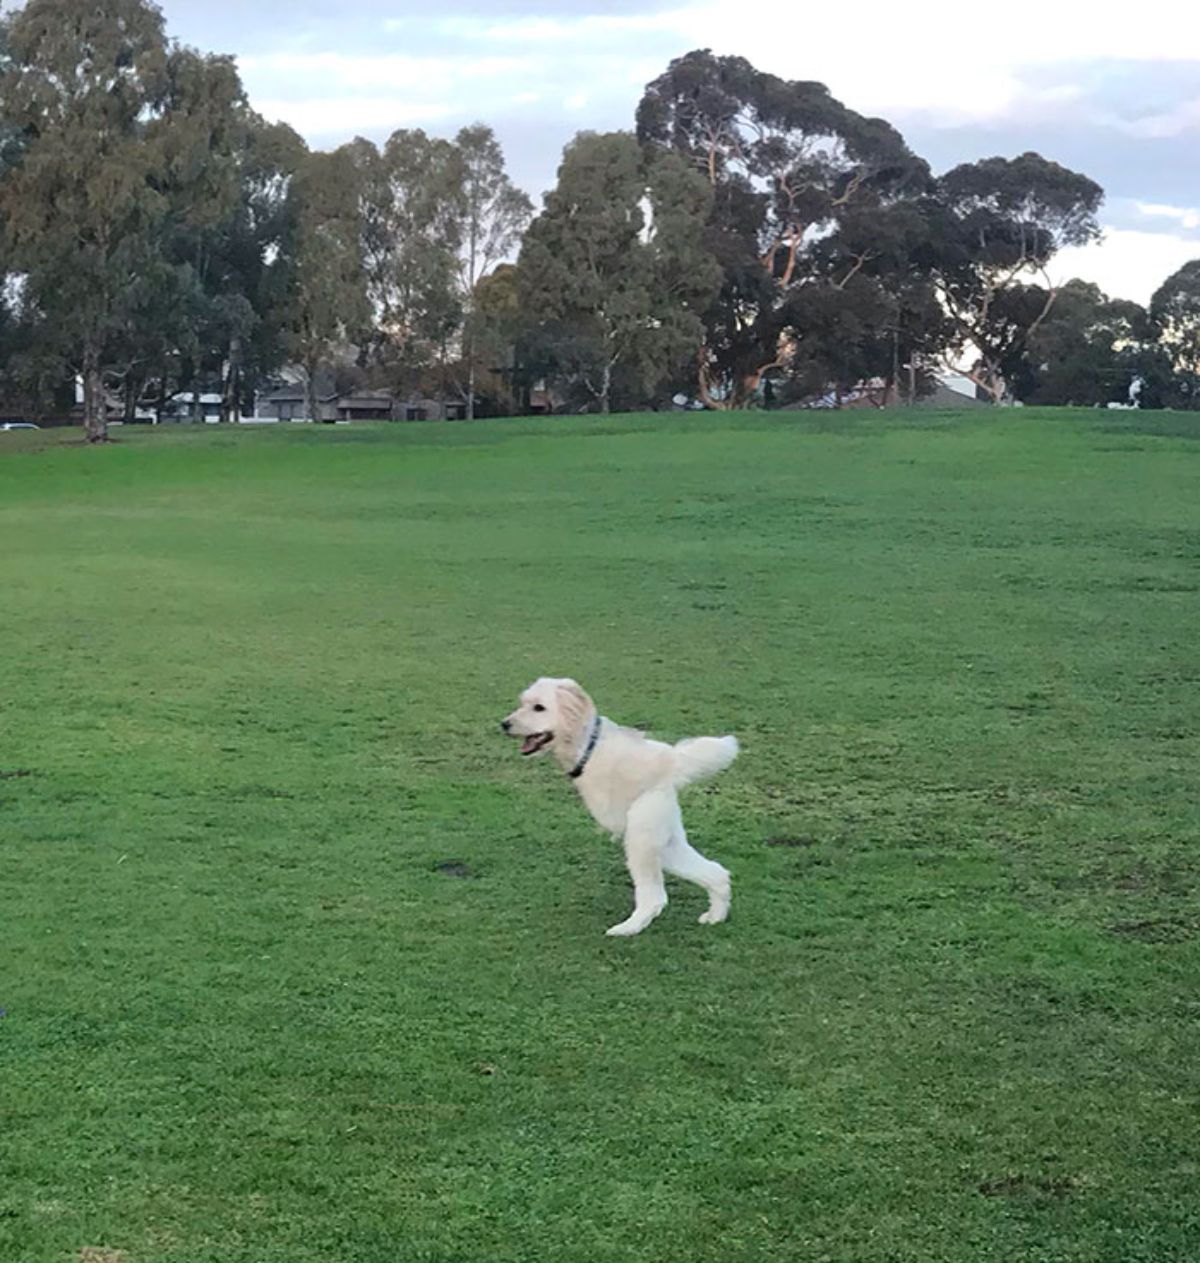 panoramic fail of white dog running on grass with only 2 legs, a tail and and the head attached to a short body followed by the tail